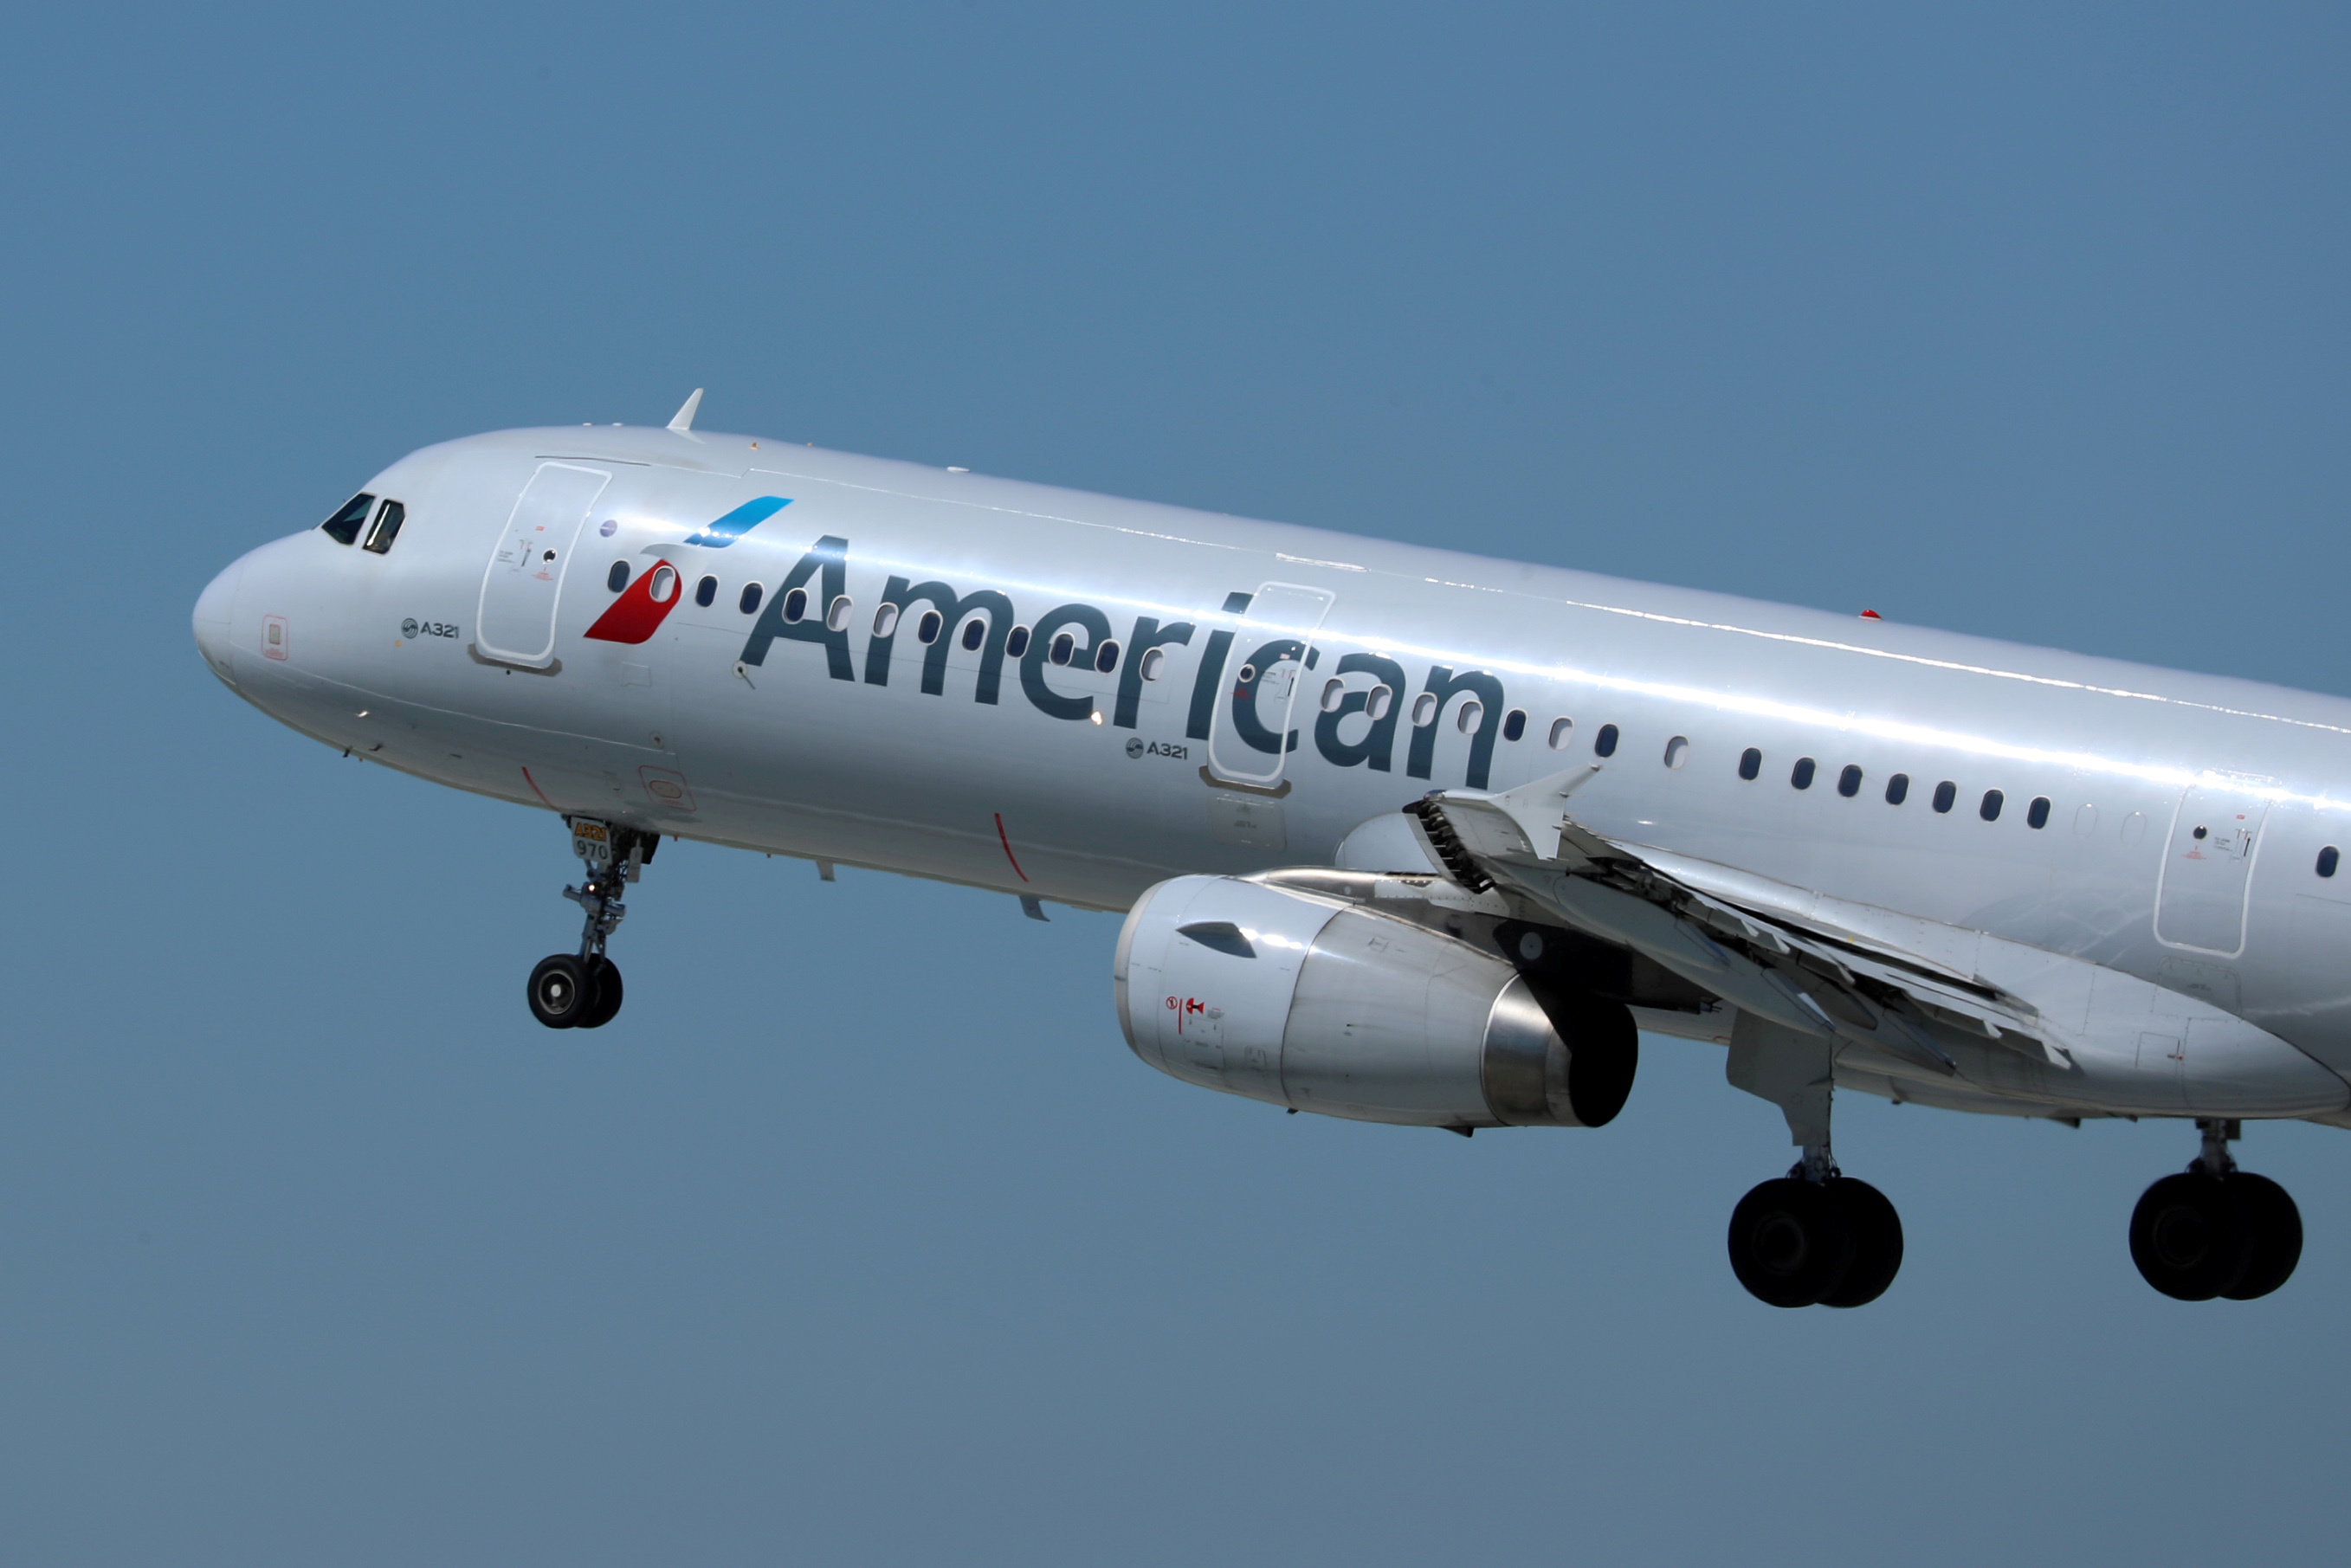 American Airlines warns of fare increases if oil price remains high